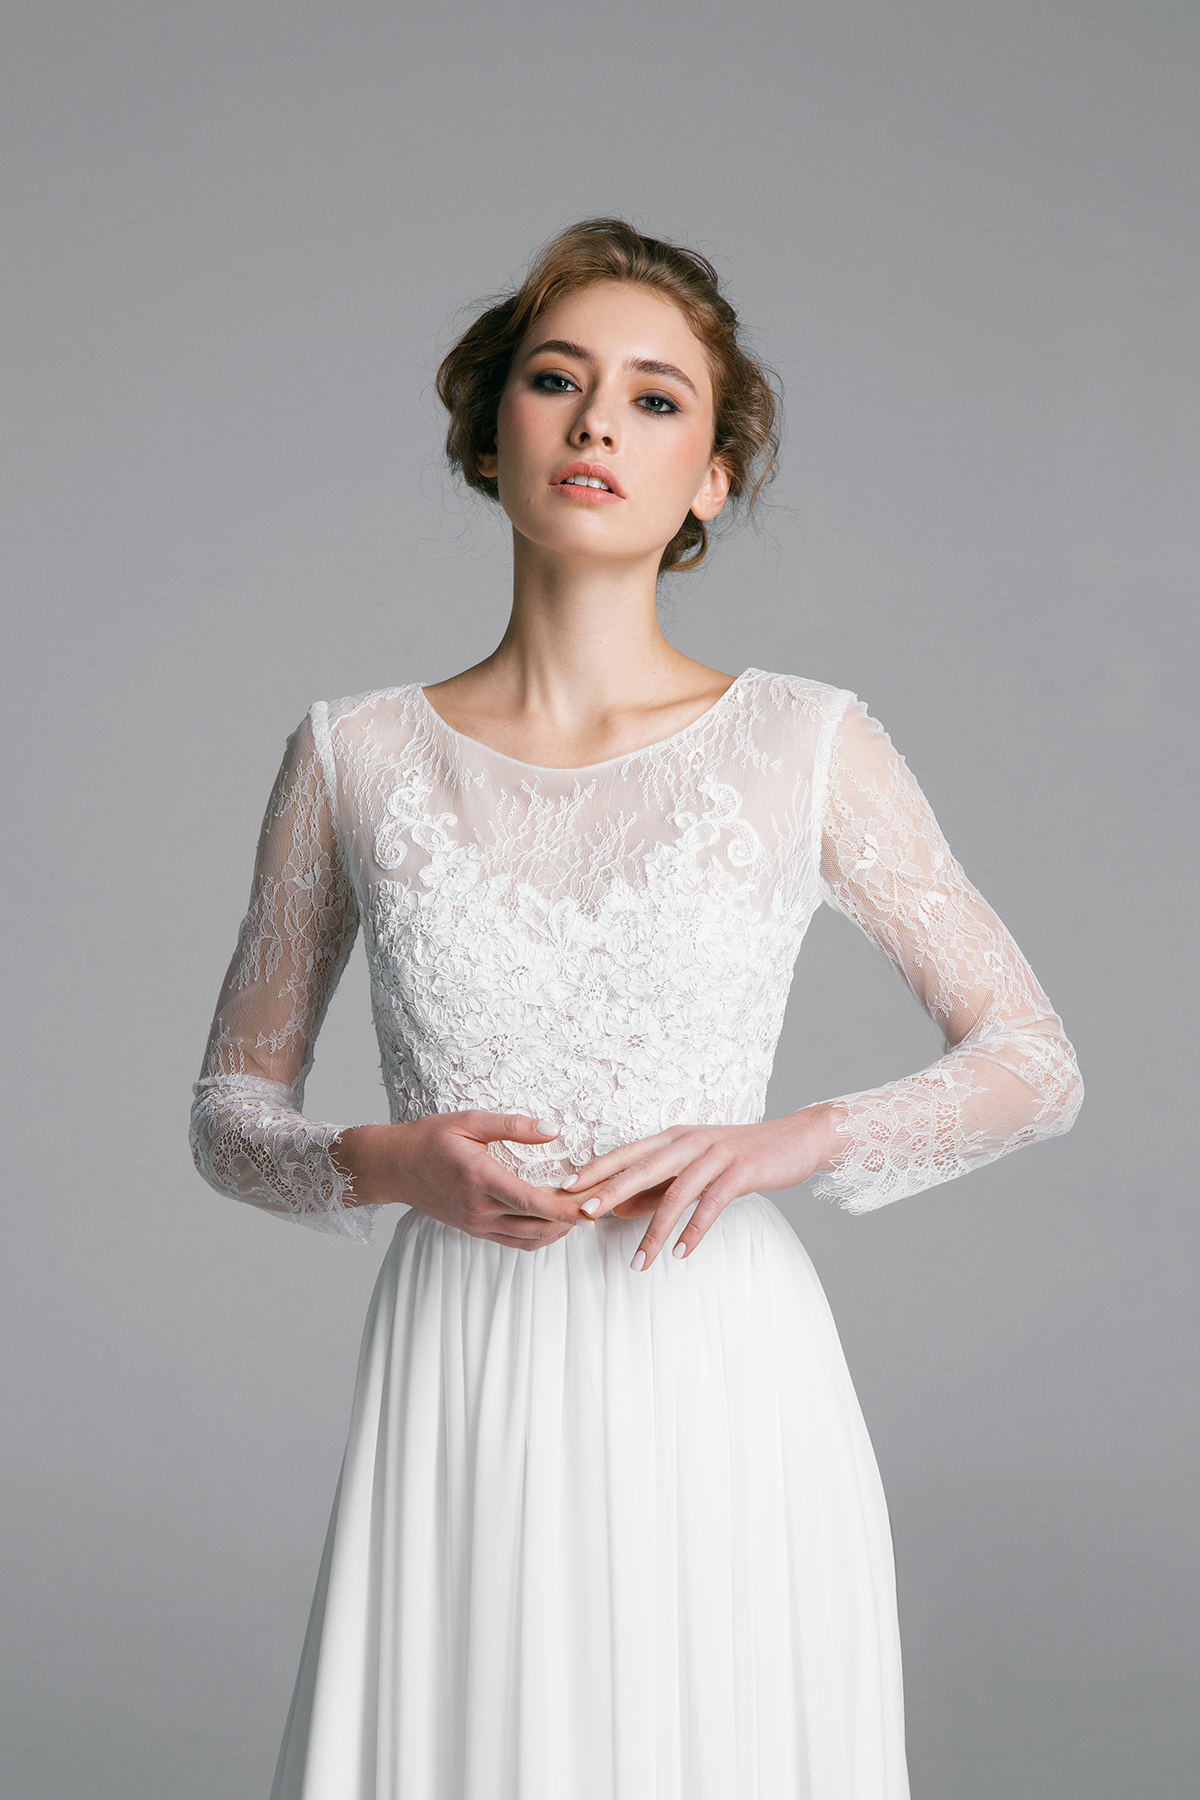 Lace and chiffon simple wedding dress in rustic style.